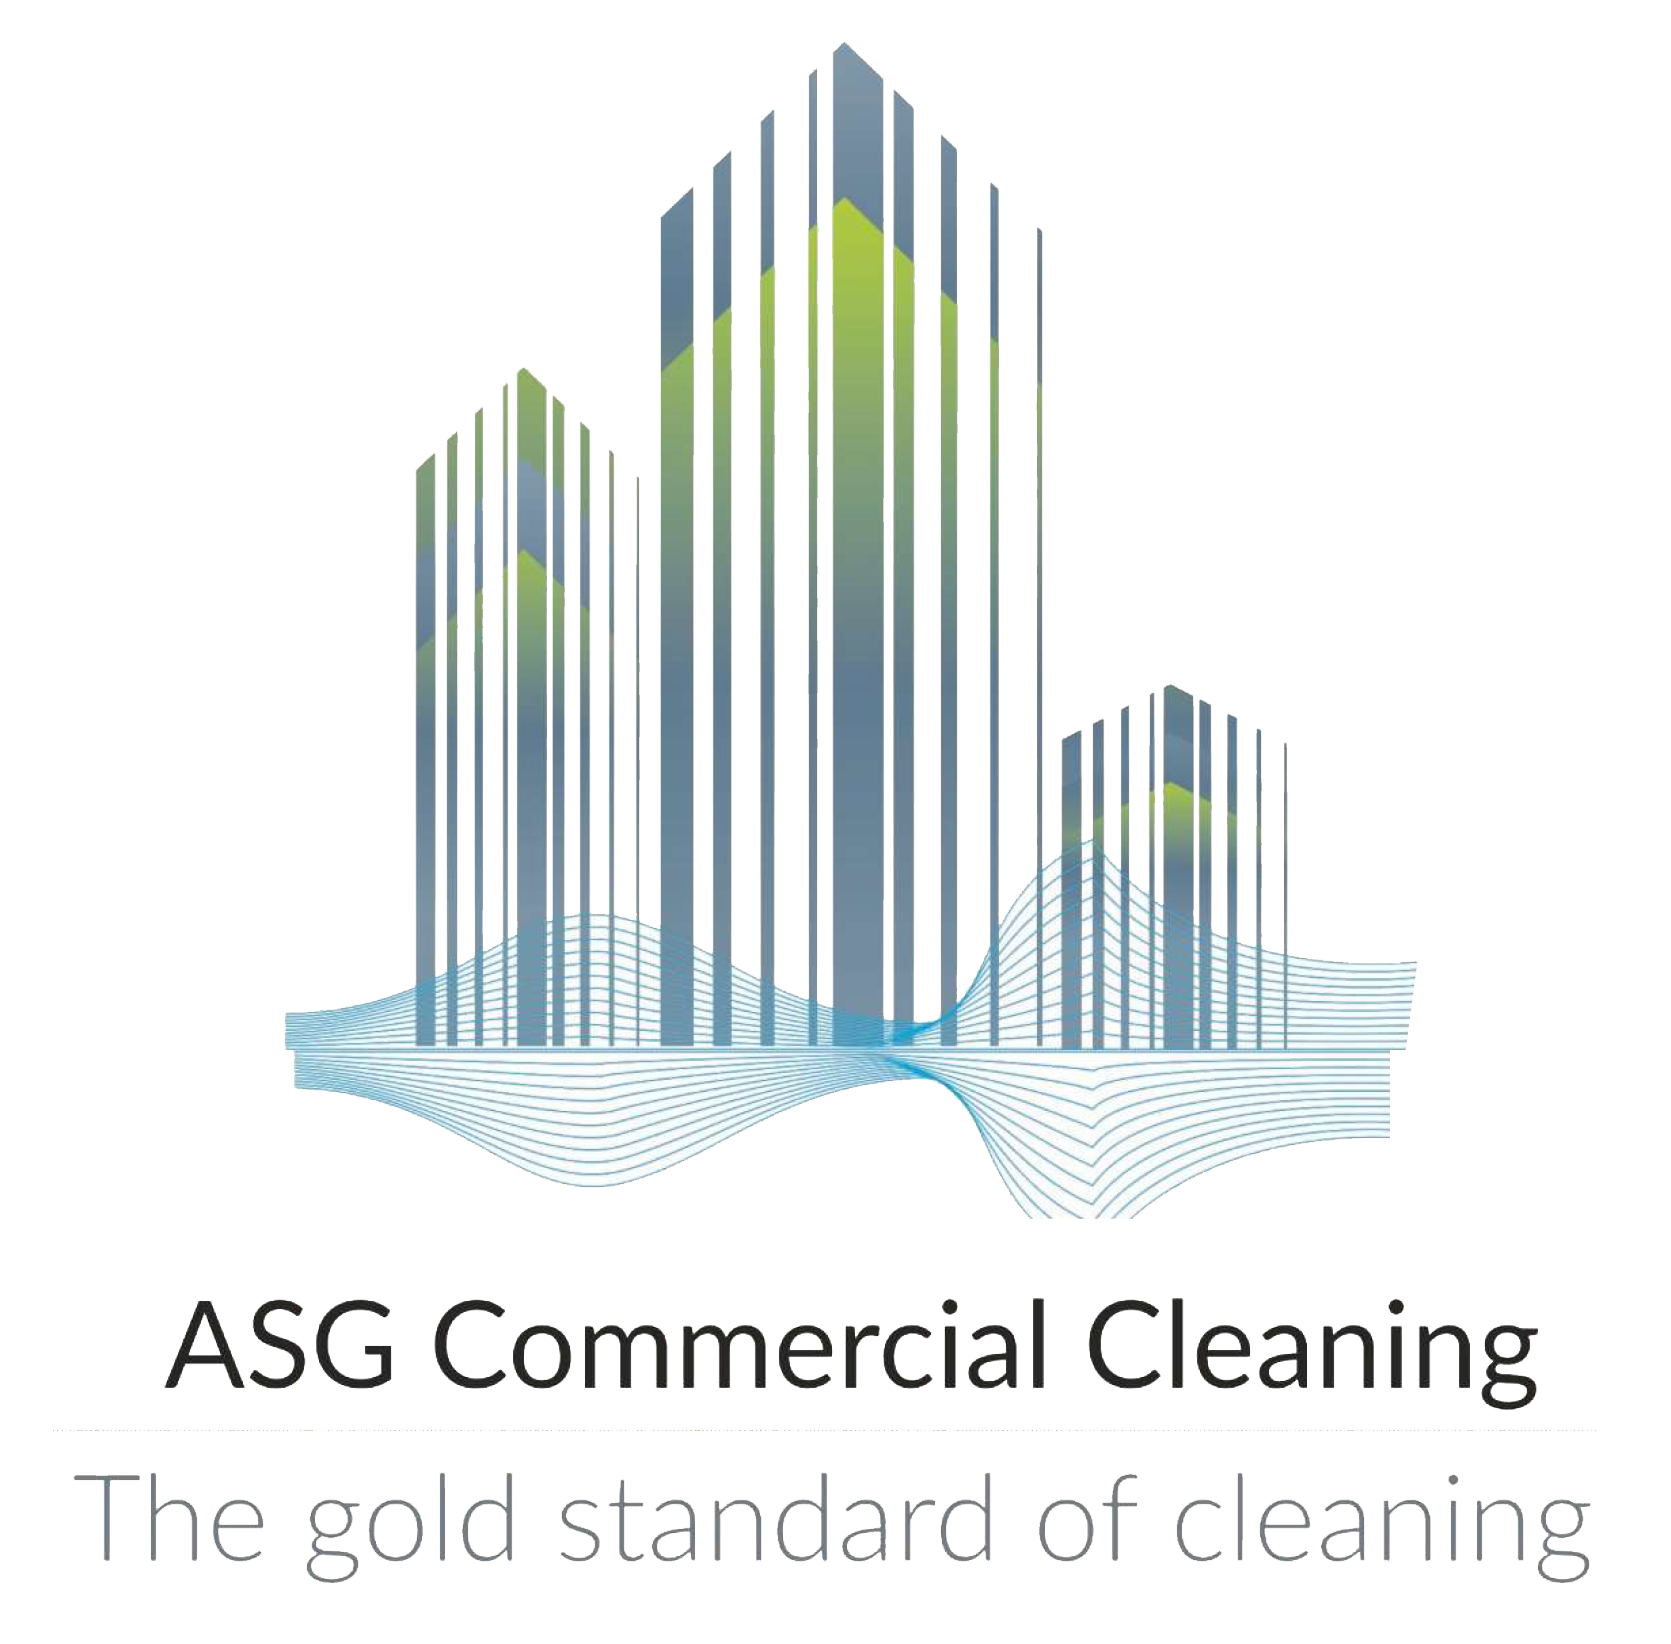 ASG Commercial Cleaning